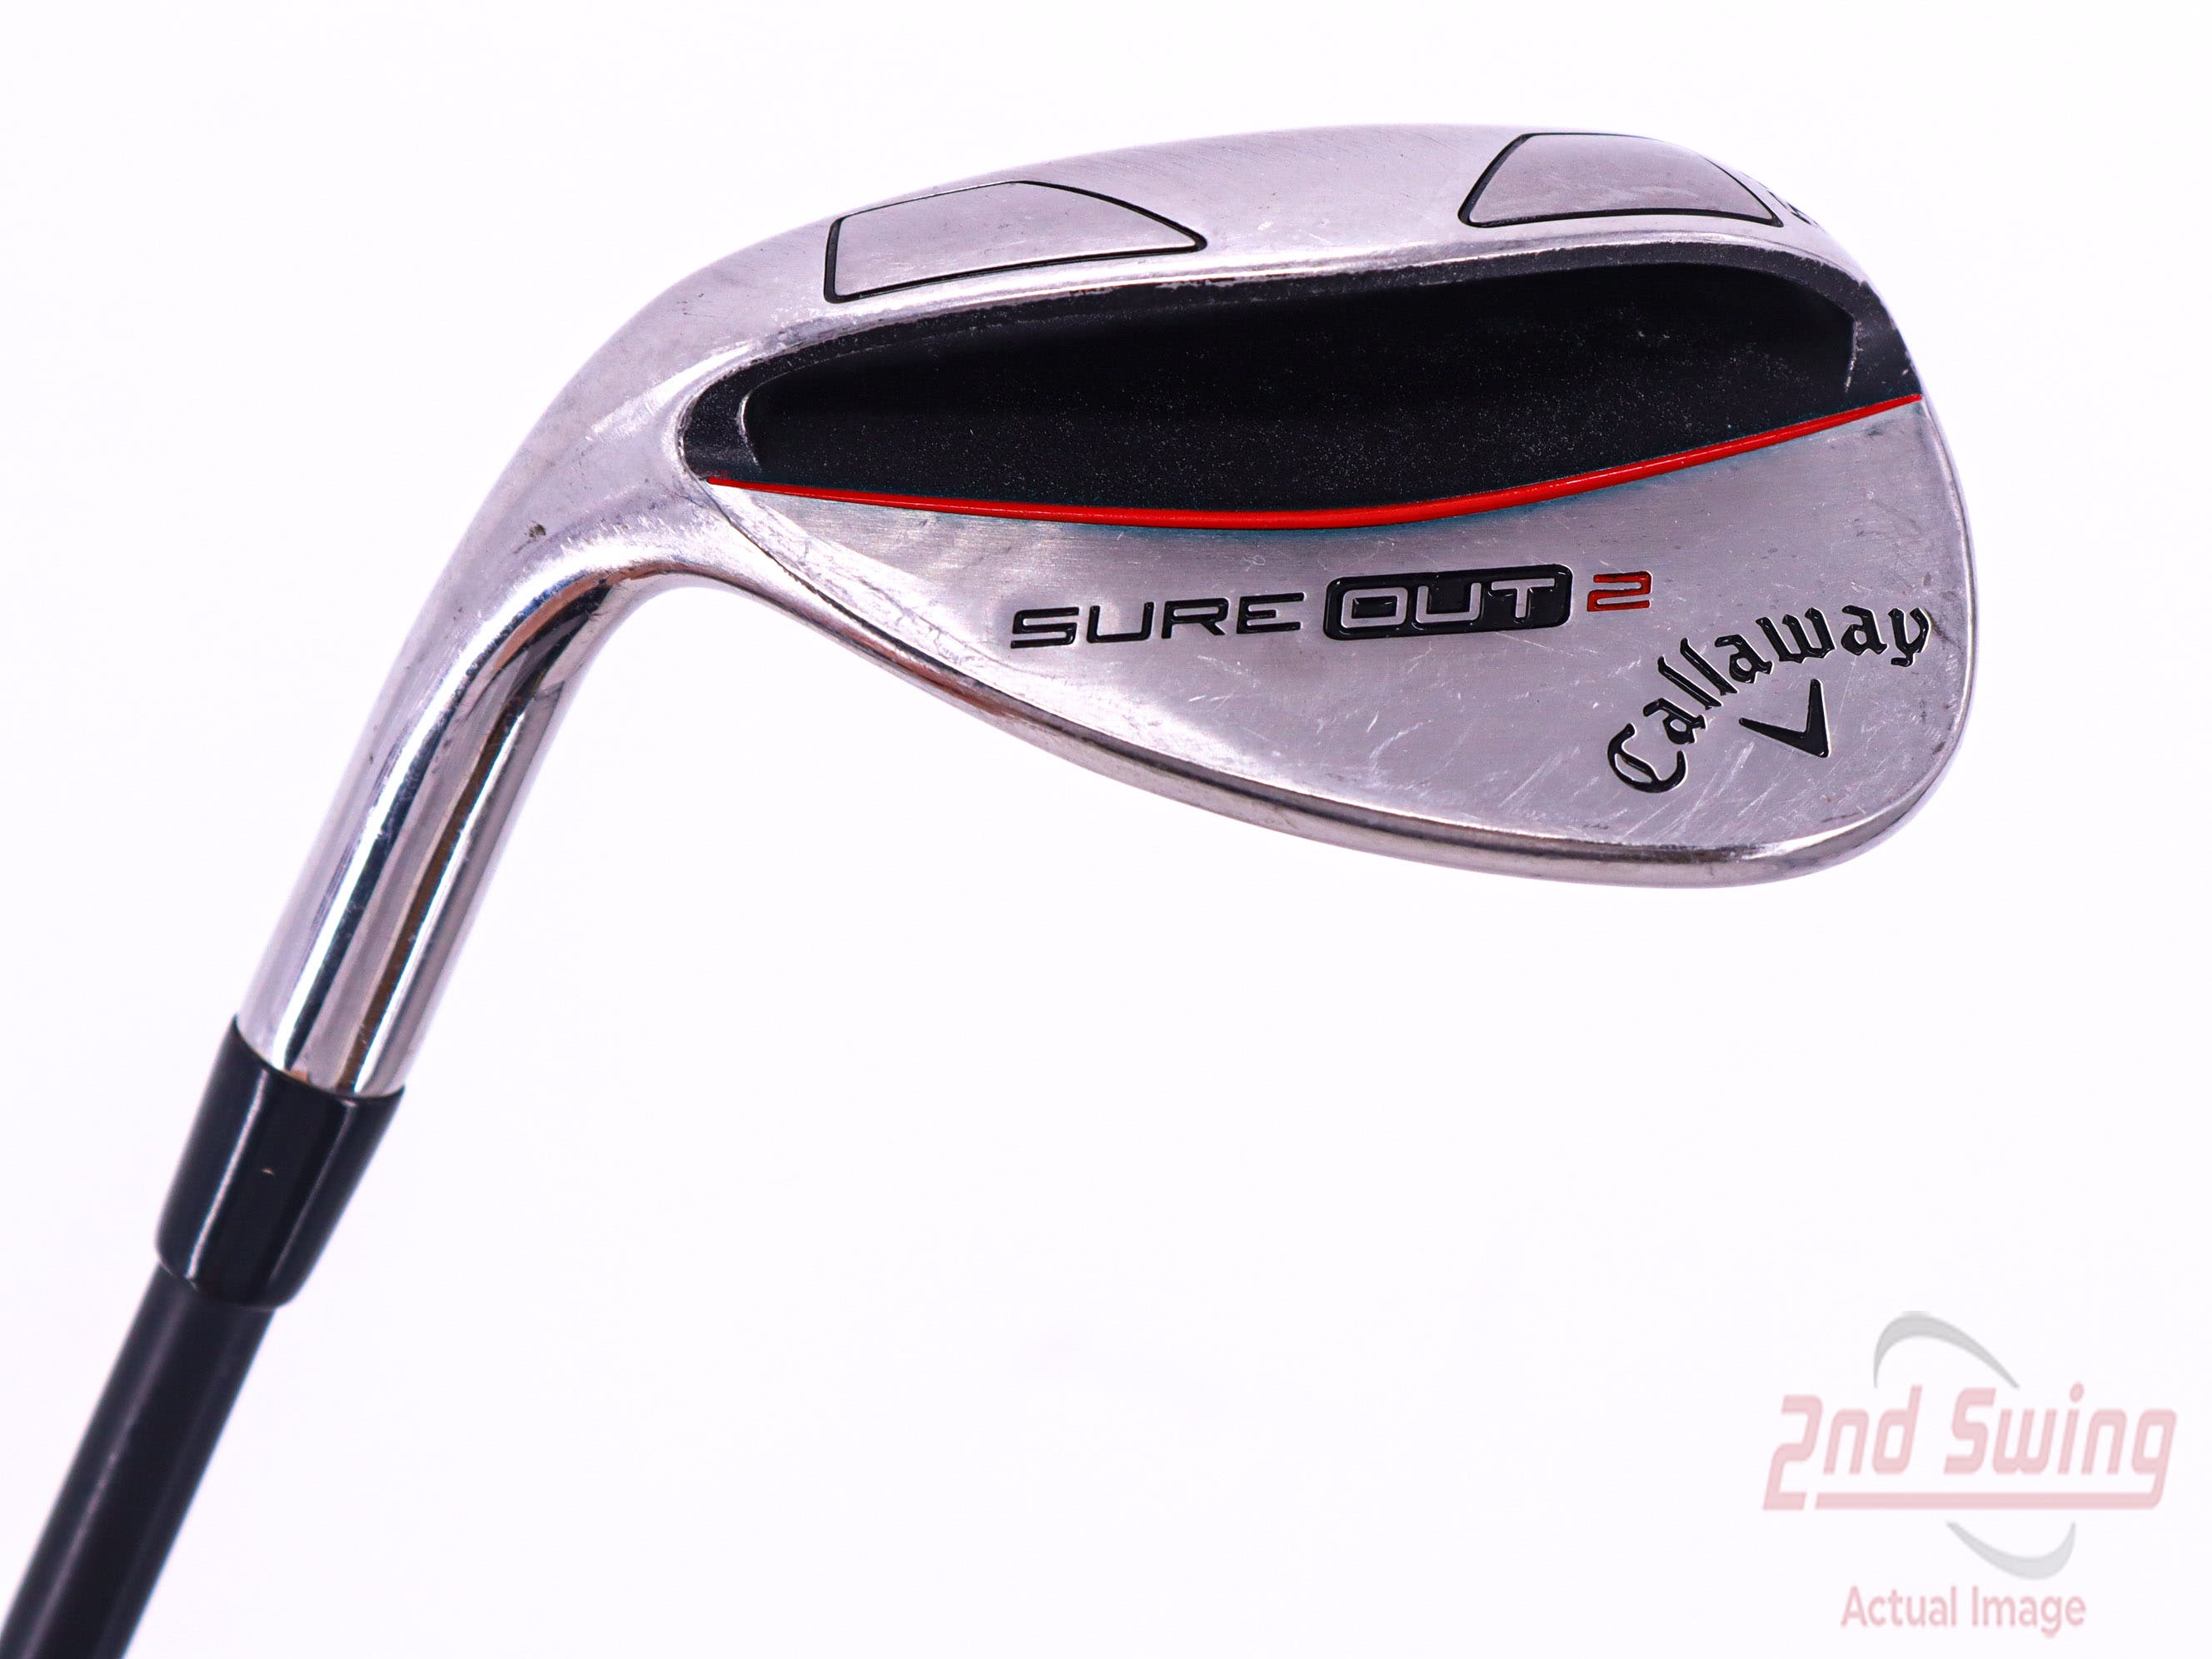 Callaway Sure Out 2 Wedge | 2nd Swing Golf